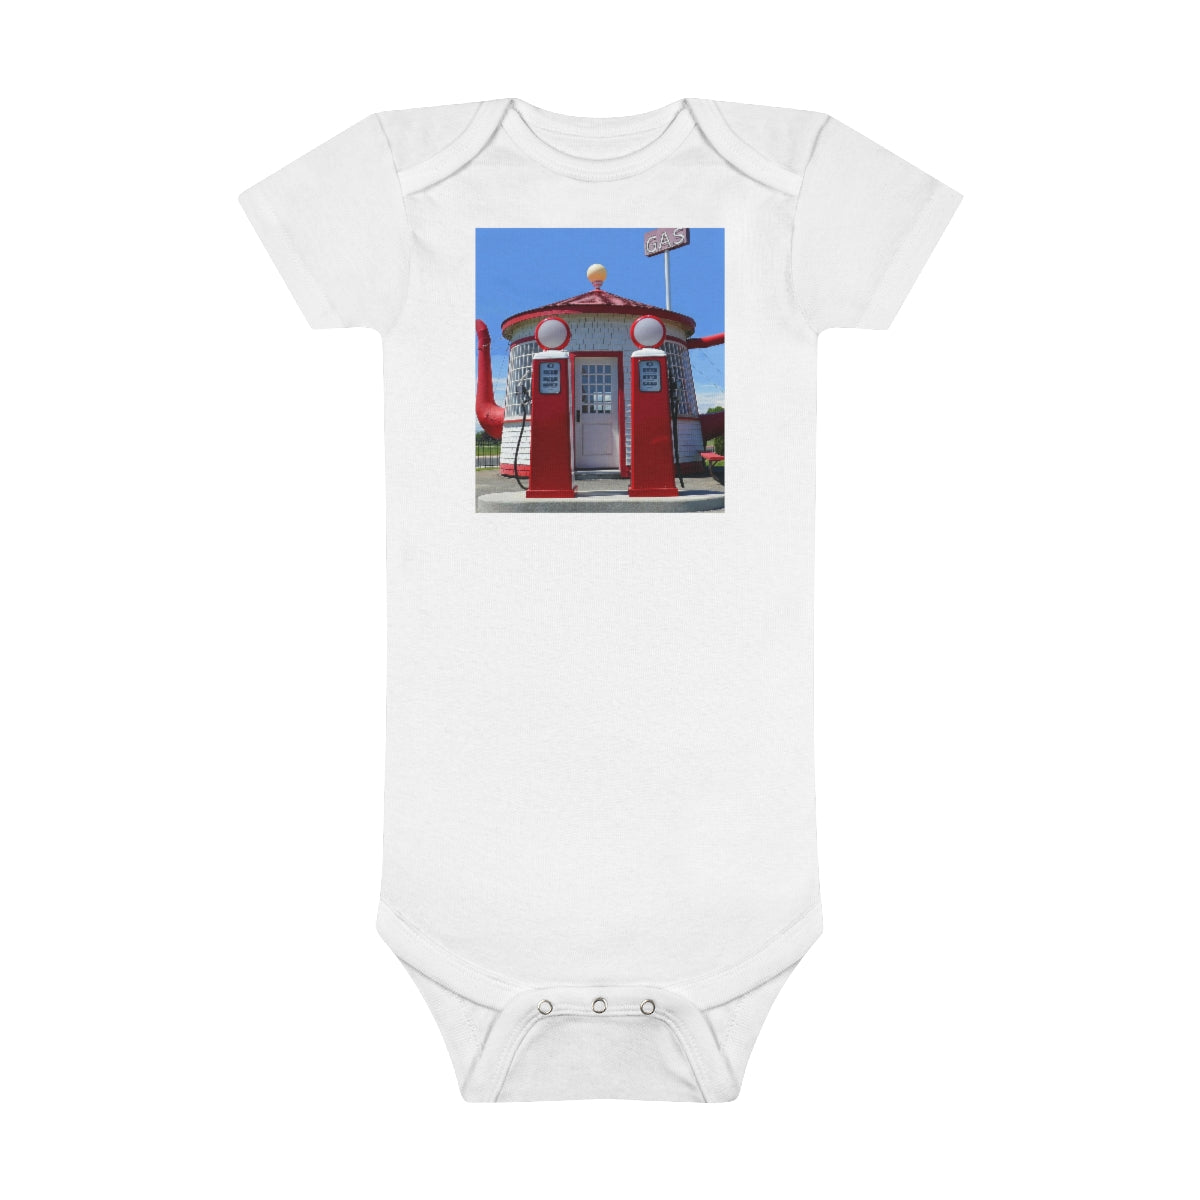 Awesome Teapot Dome Service Station - Baby Short Sleeve Onesie - Fry1Productions